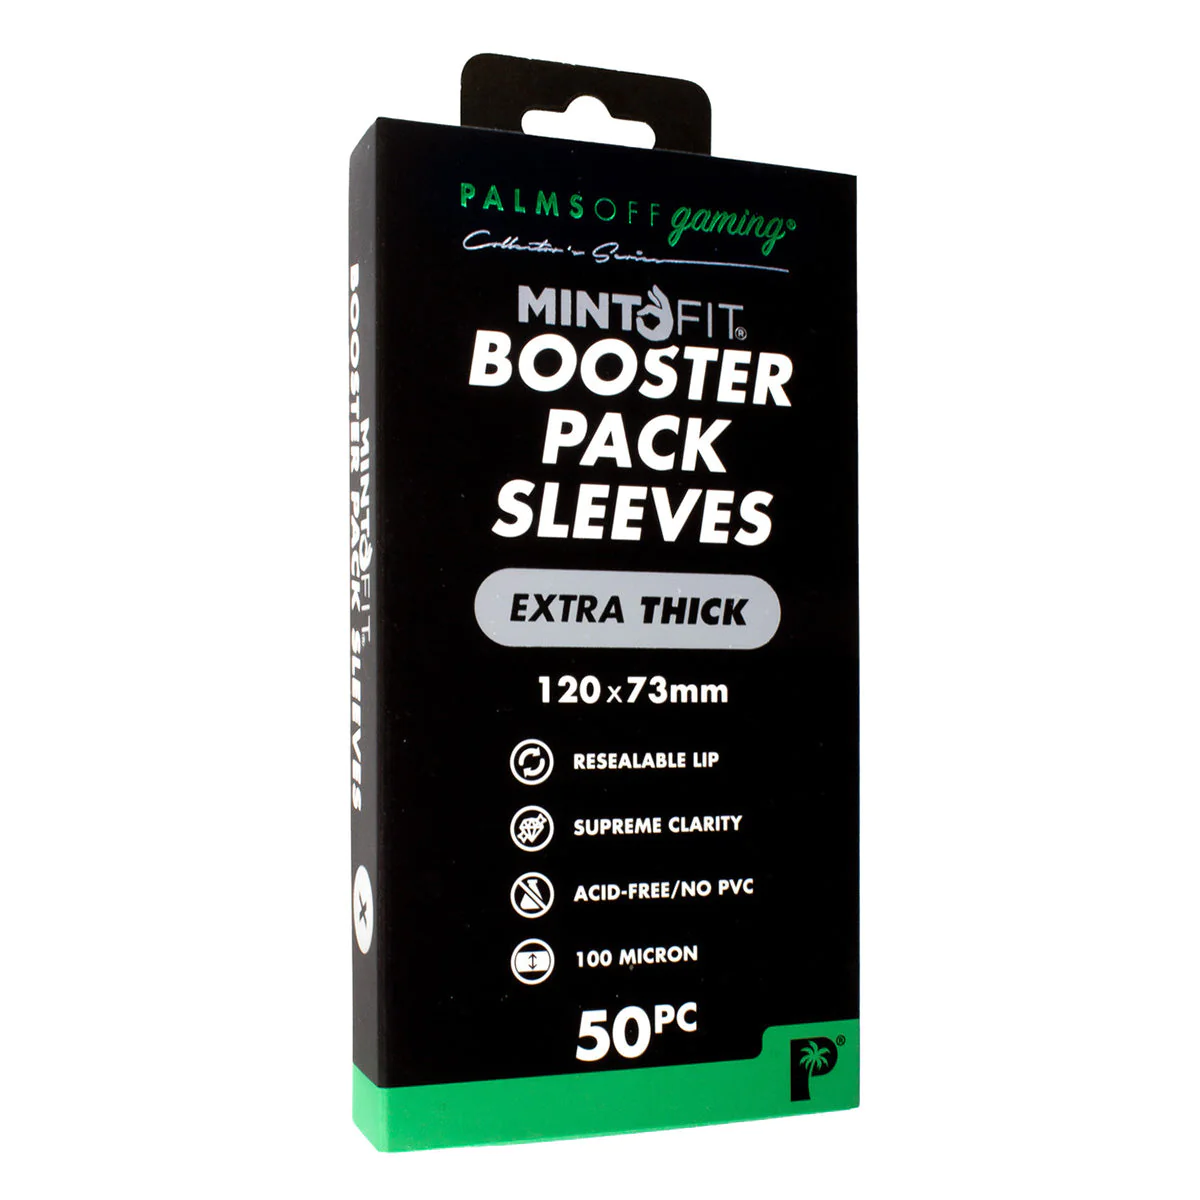 Booster Pack Mint-Fit Sleeves - Extra Thick 50pc